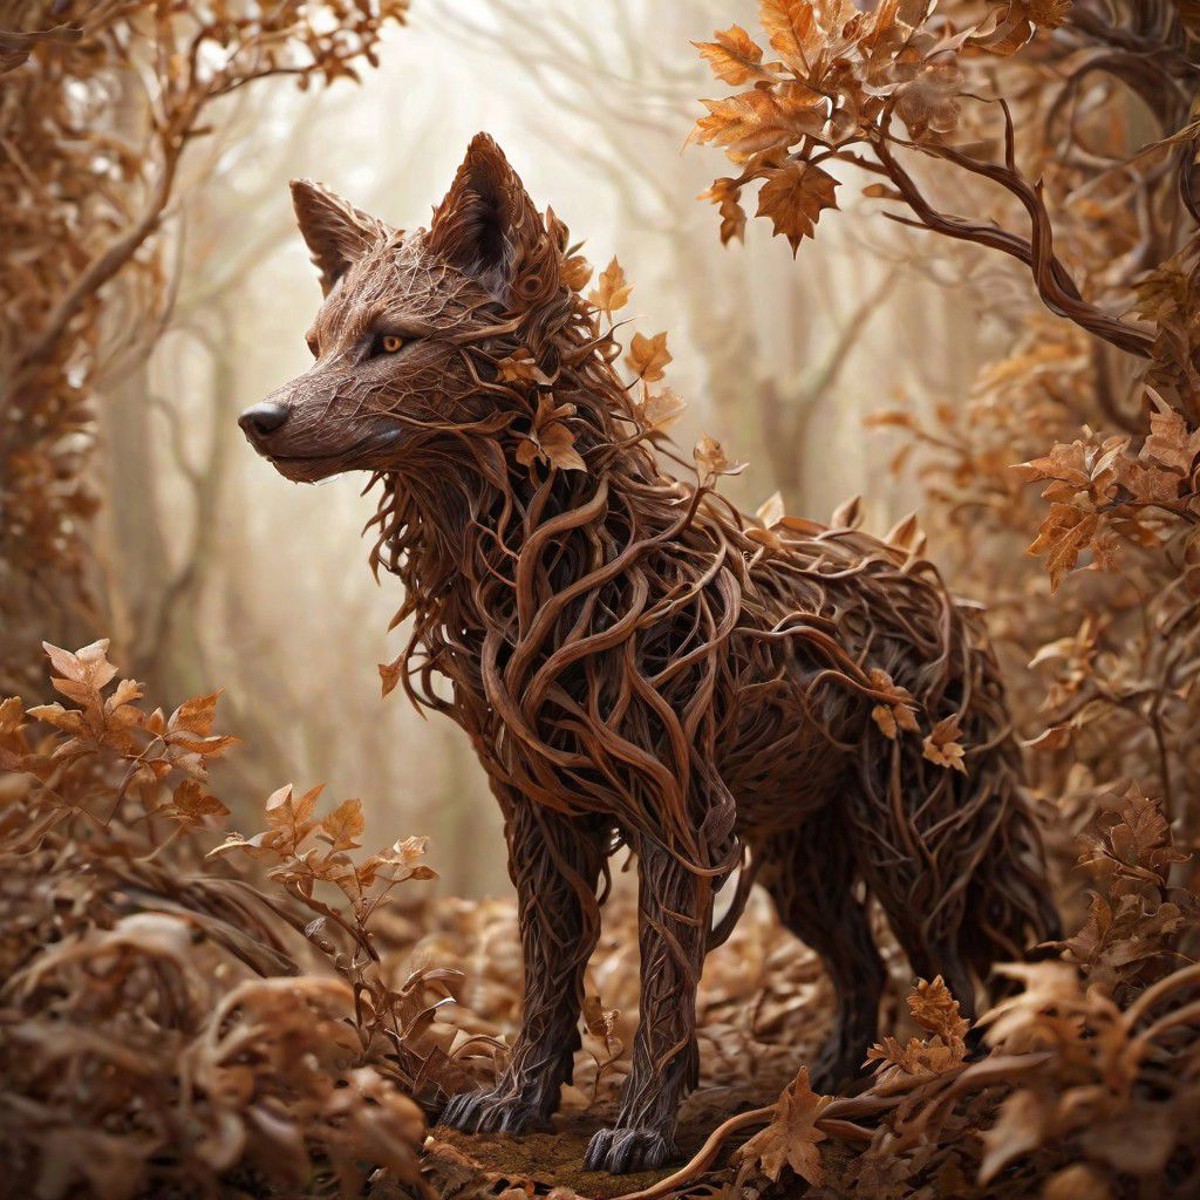 fractalvines, a fluffy mythical female wolf creature made from brown fractal vines,